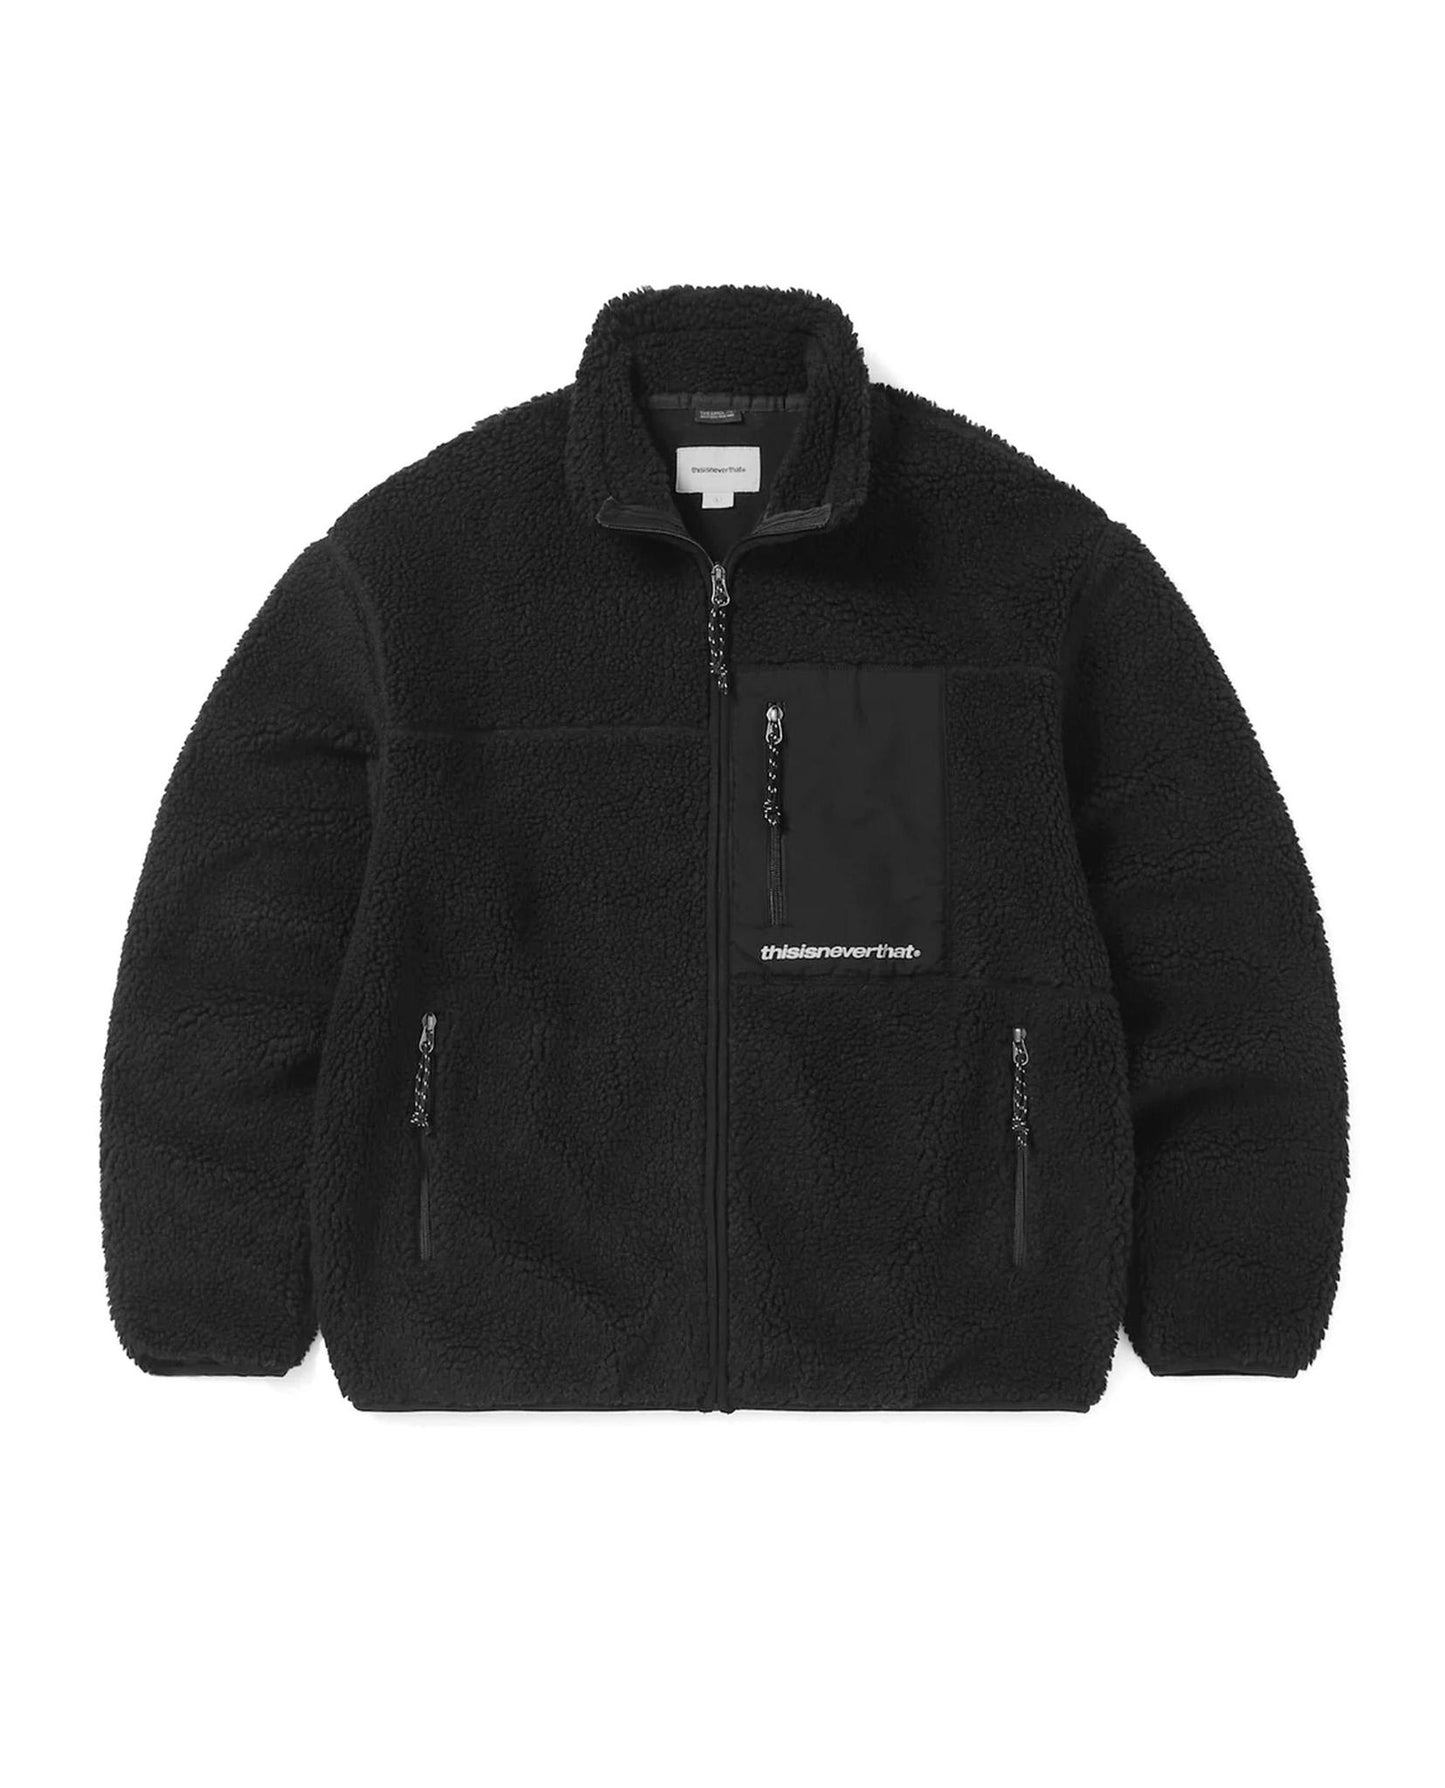 
                    
                      This Is Never That SP Sherpa Fleece Jacket
                    
                  